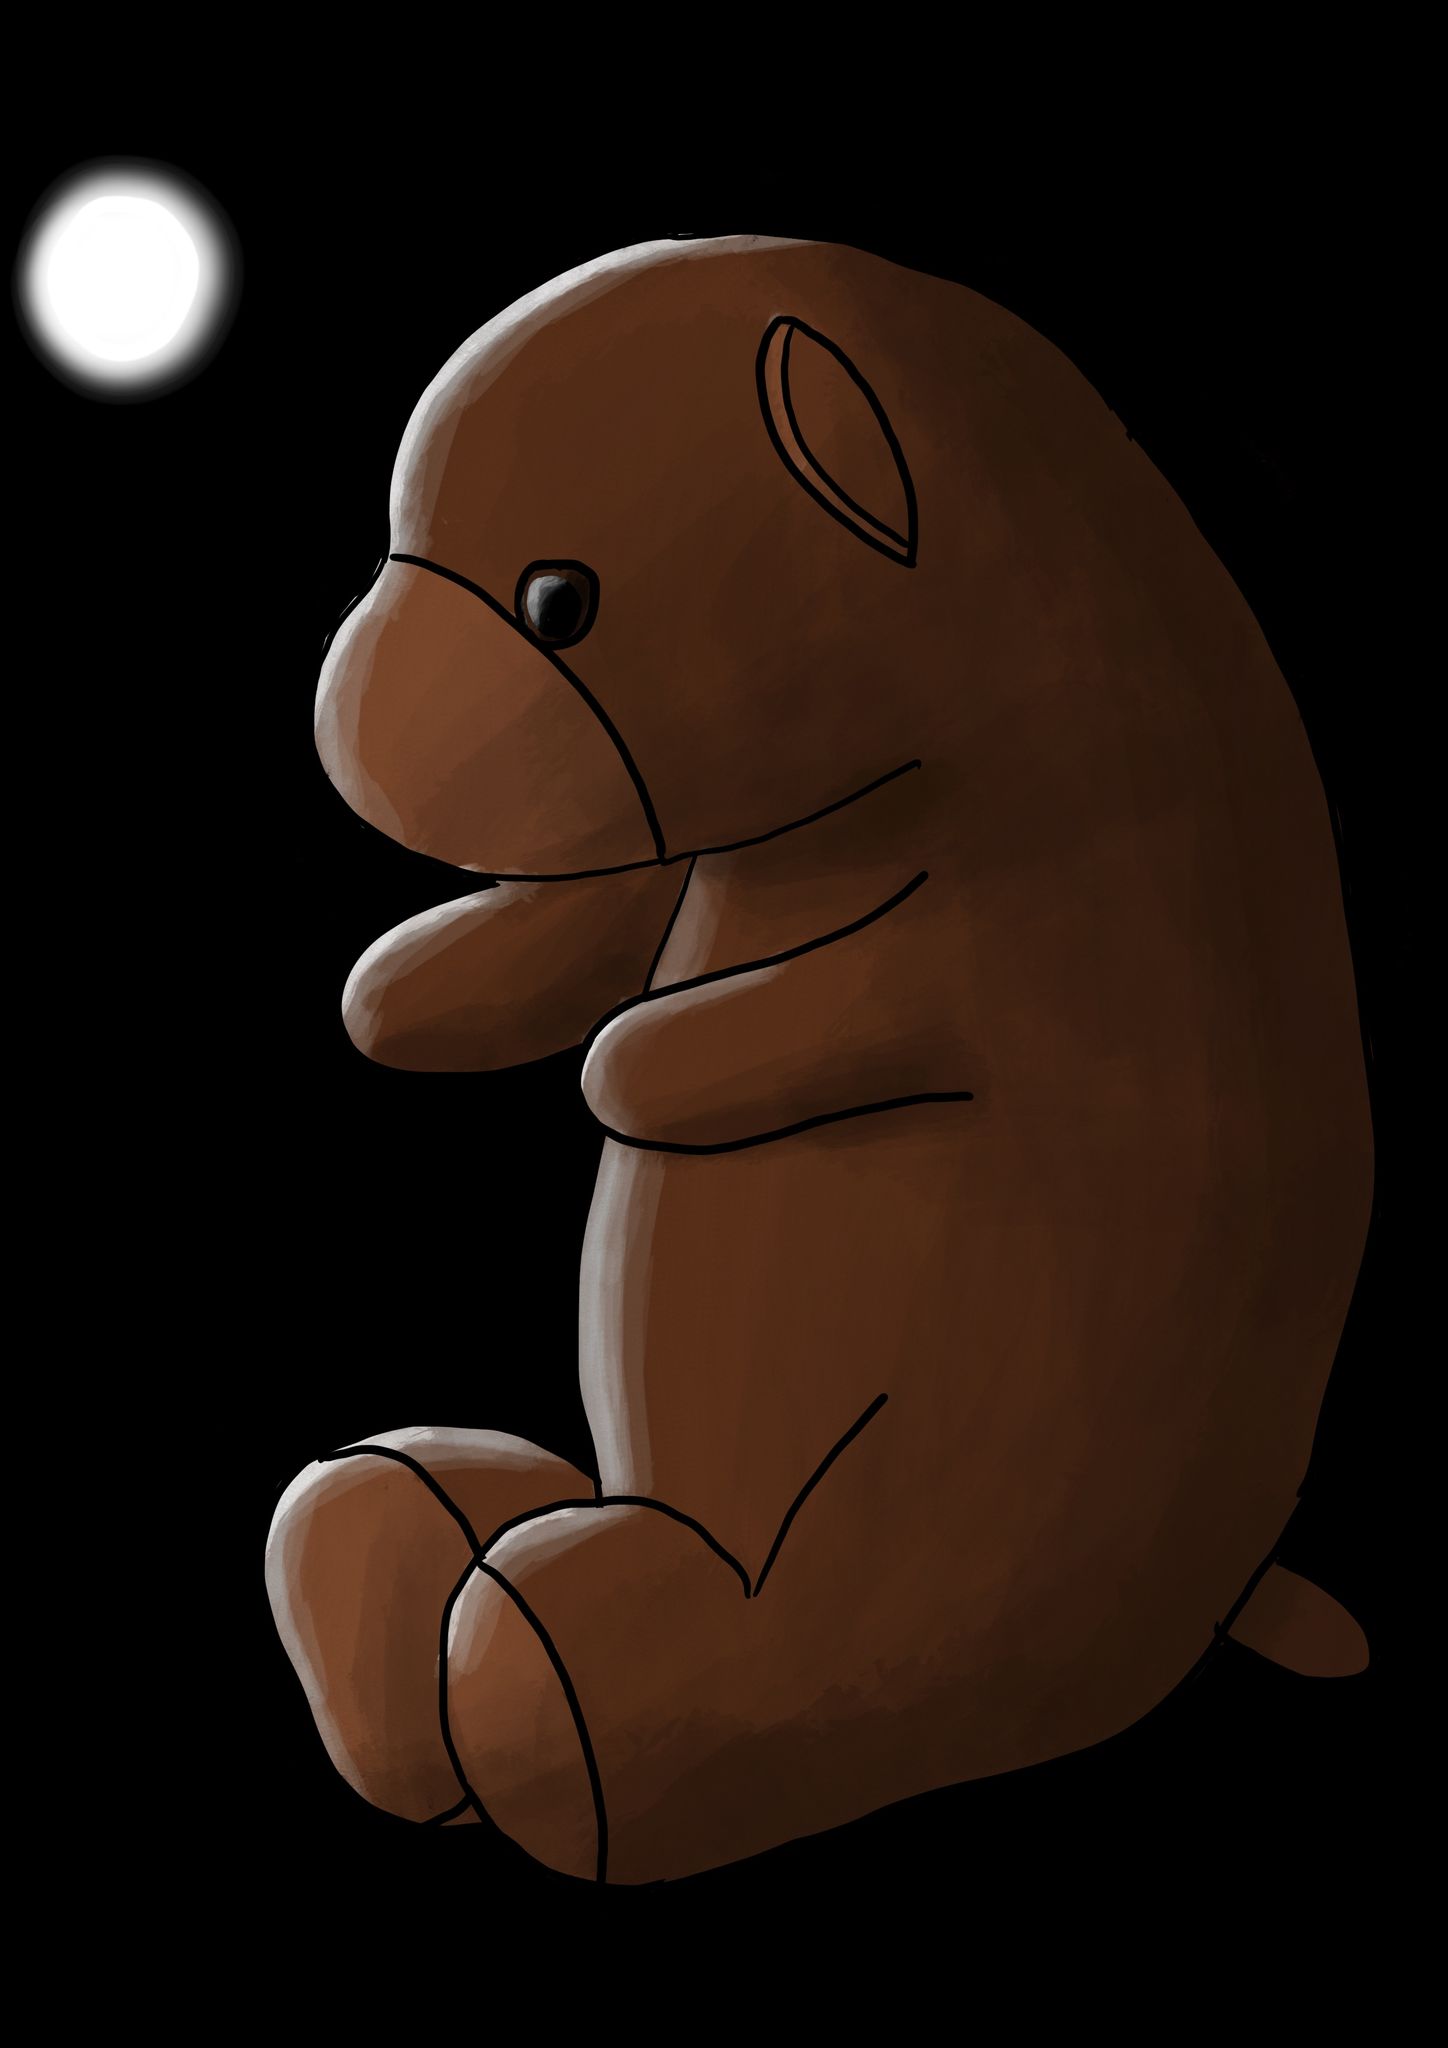 A three-quarter profile of a brown teddy bear on a black background, the edges of the left side of him are lit from a bright white light source to the left of the painting.